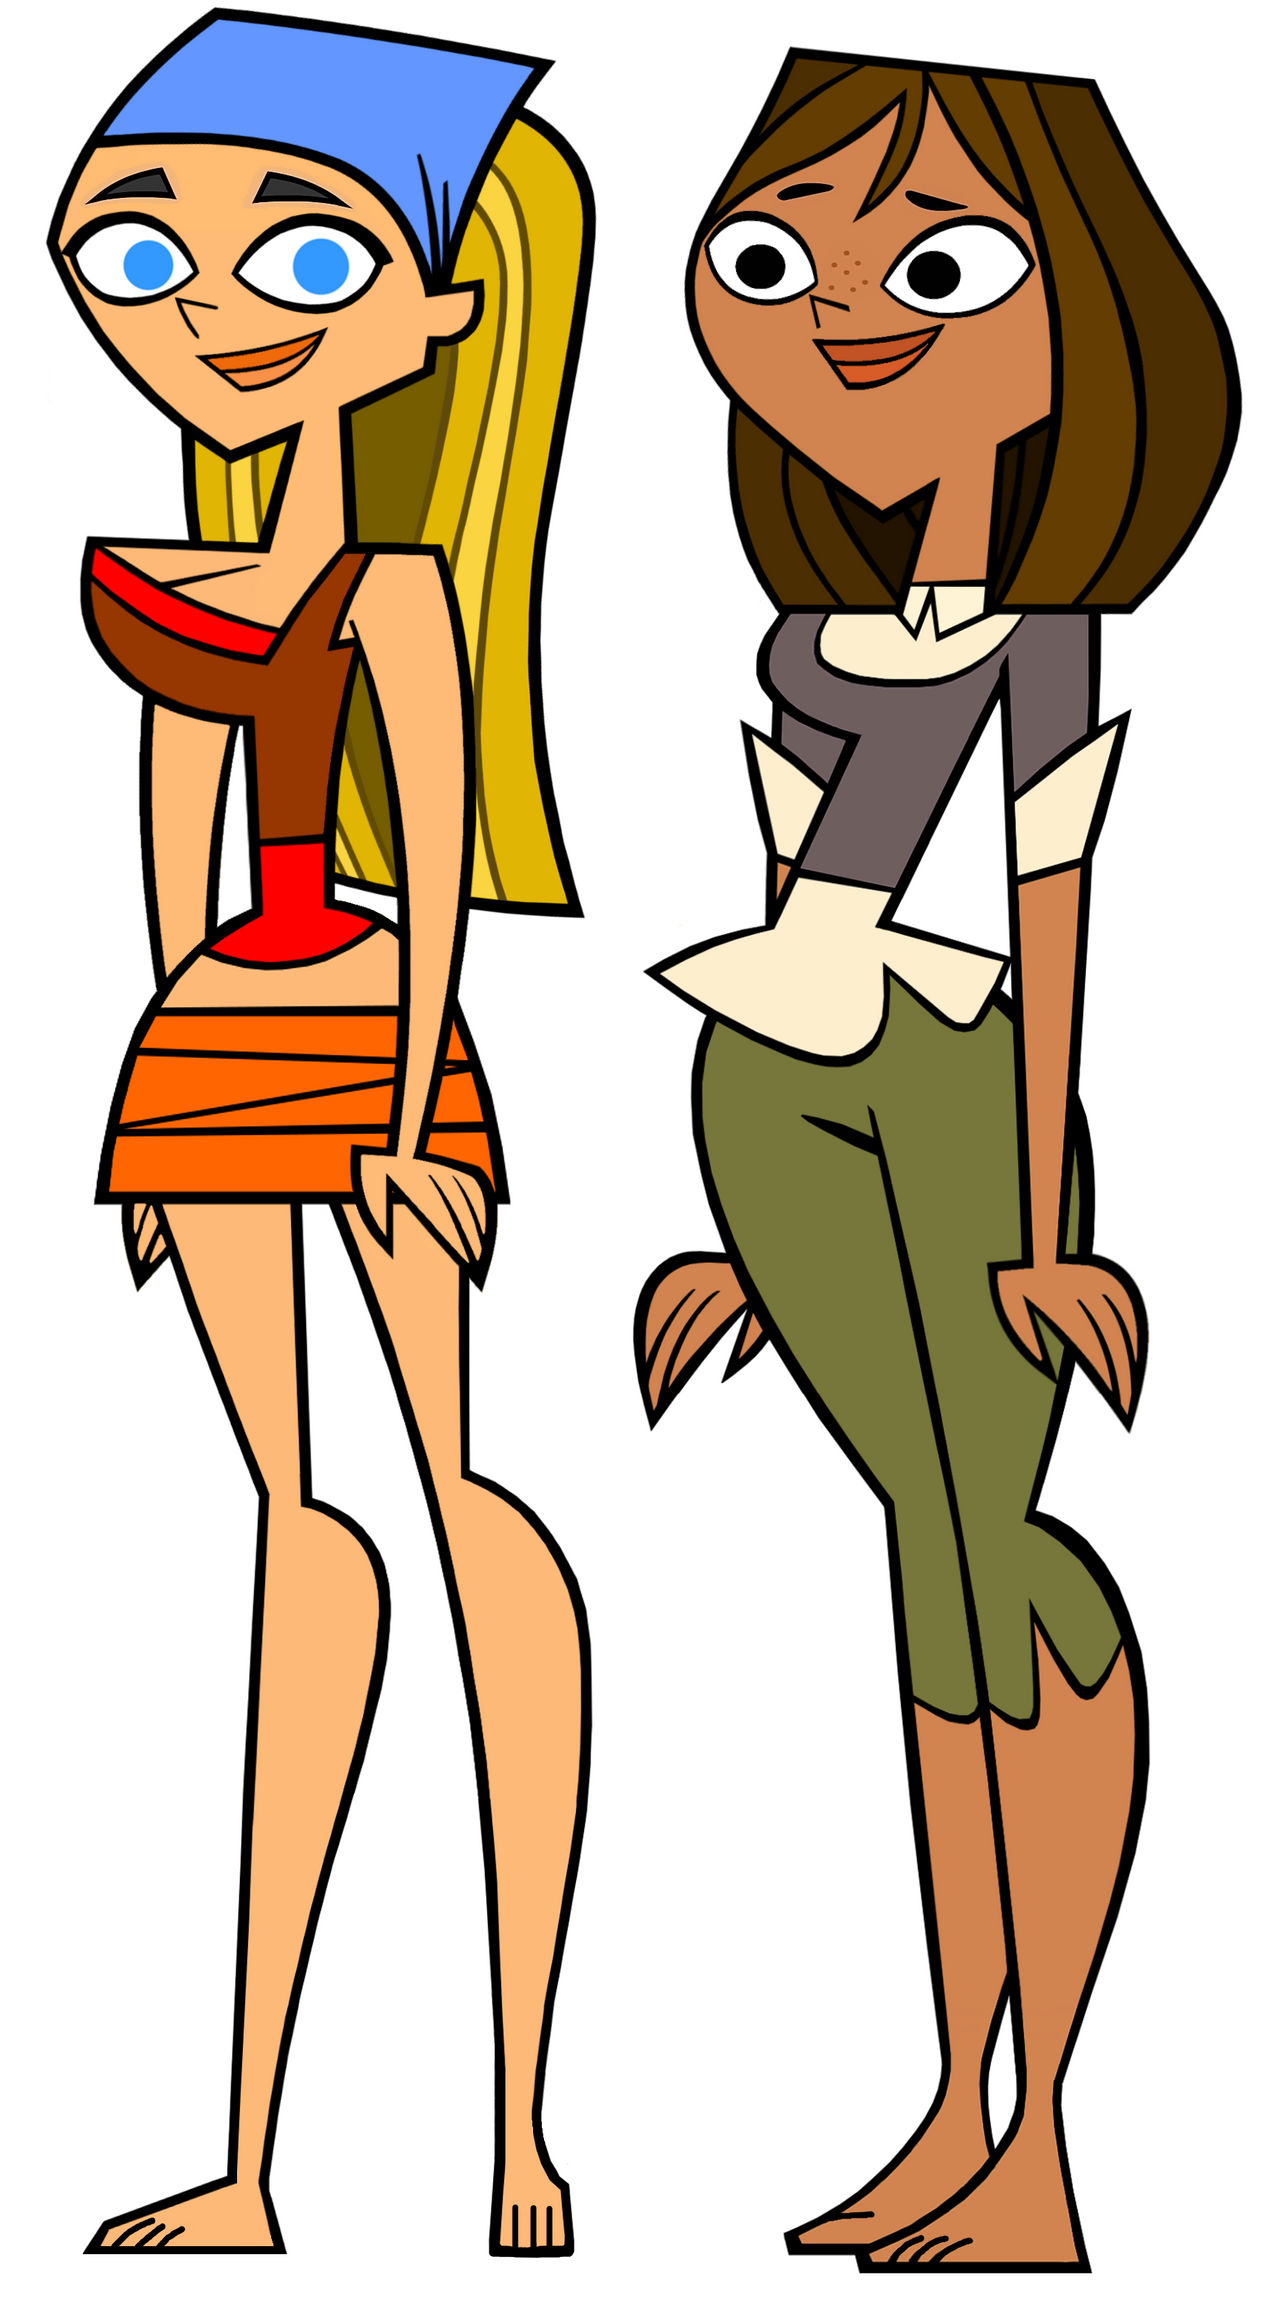 Lindsay and Courtney in barefeet by mawii17 on DeviantArt